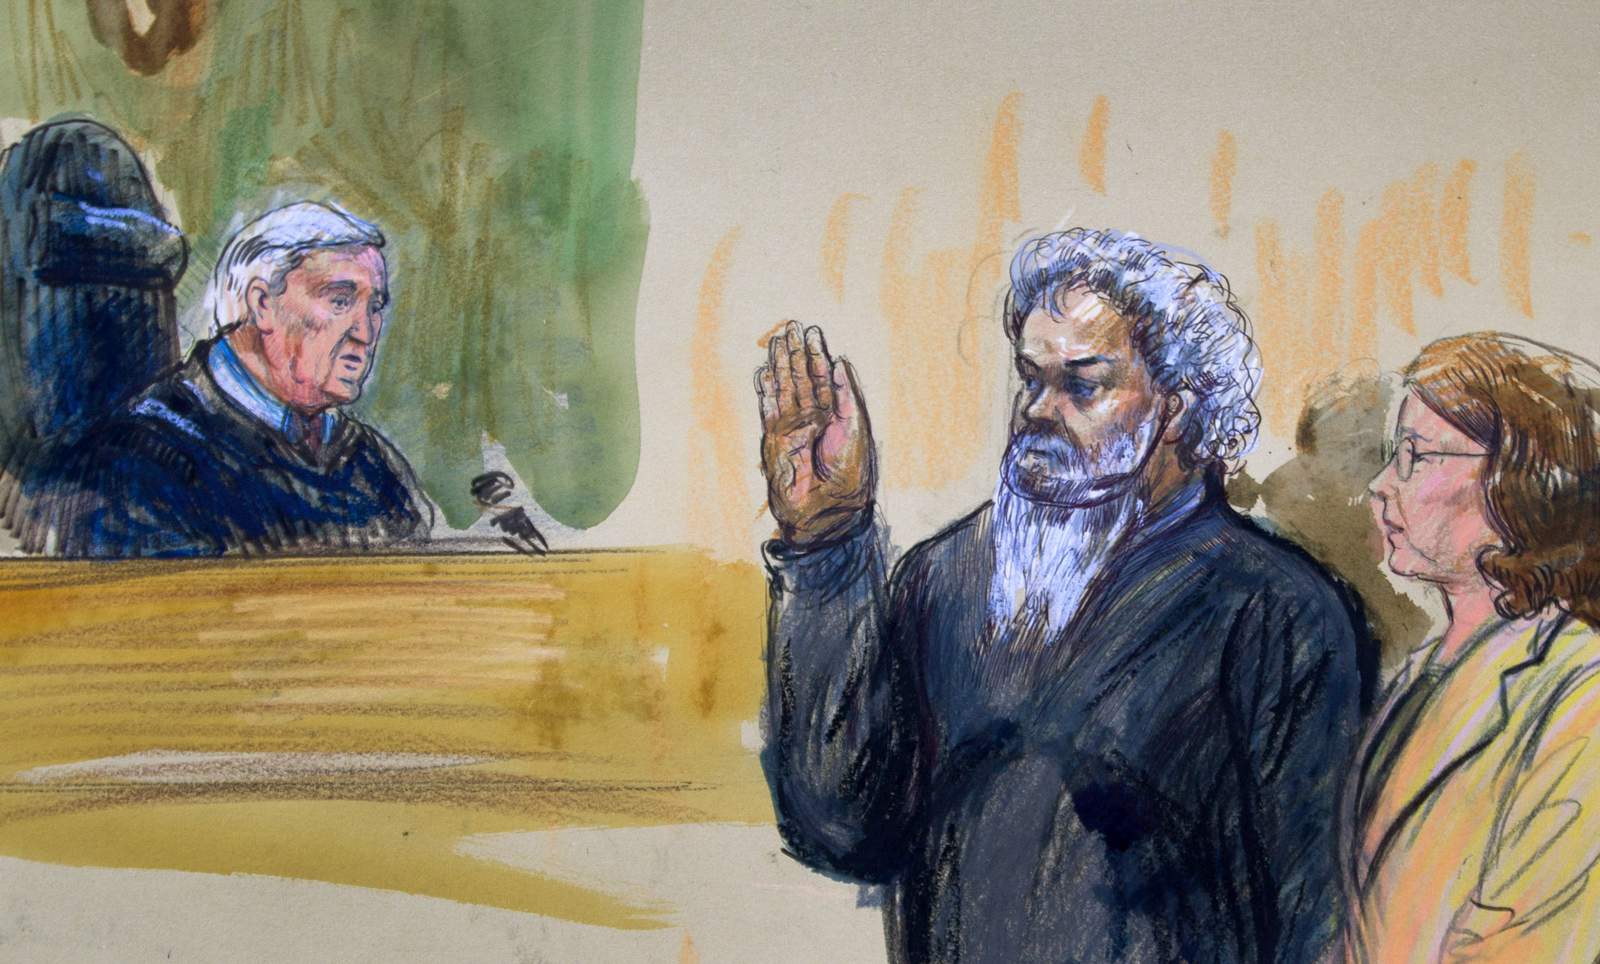 Militant convicted in fatal Benghazi attack seeks new trial